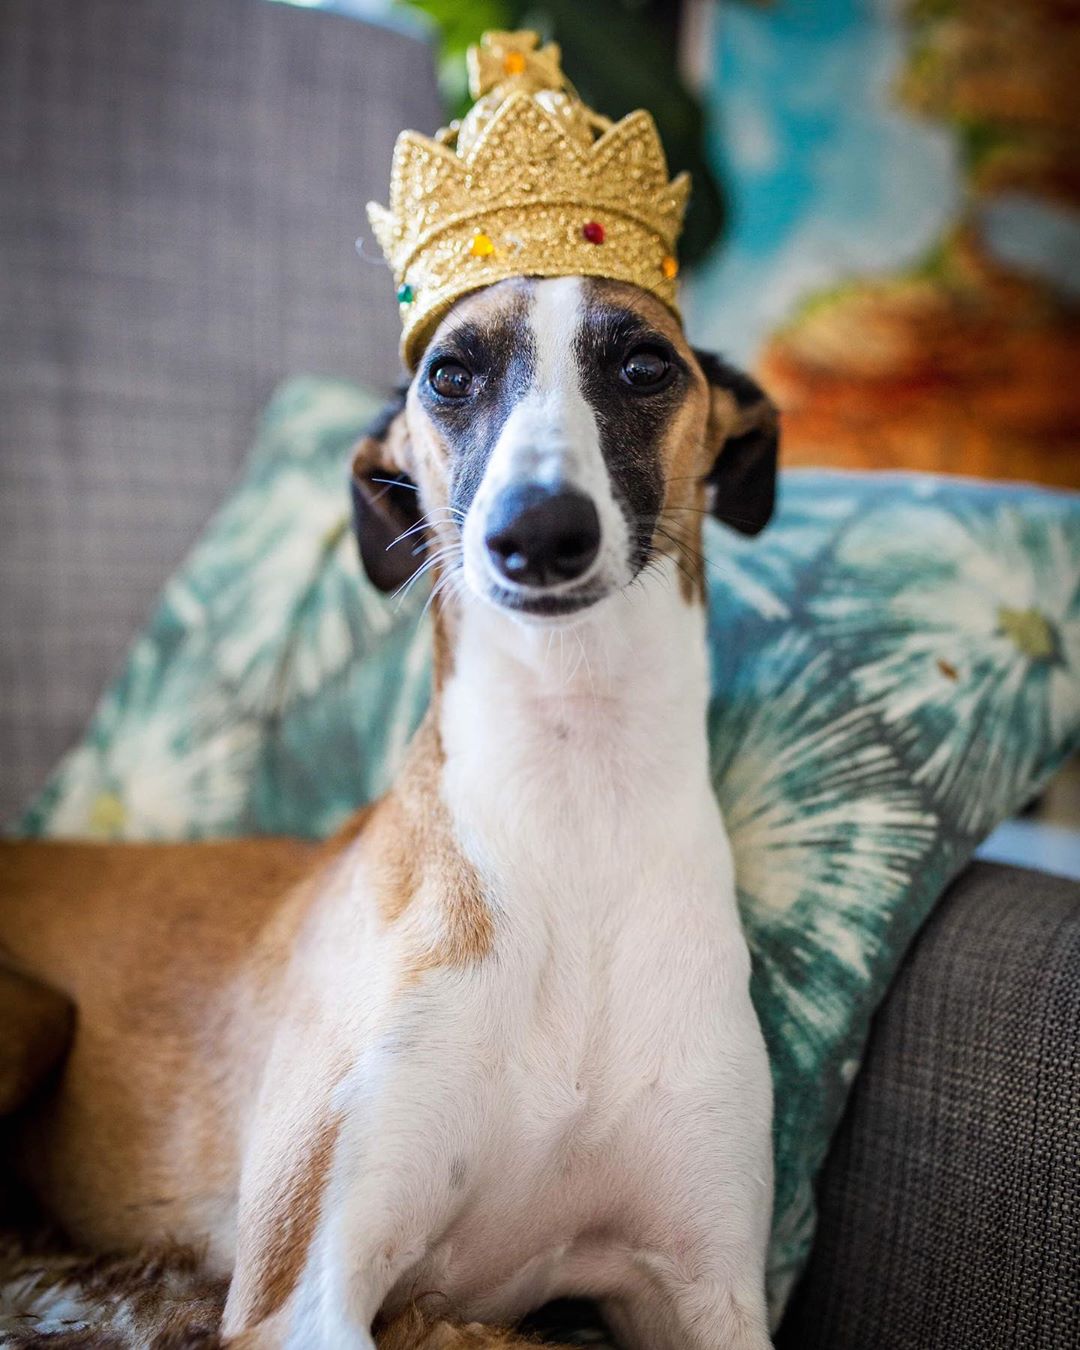 14 Adorable And Funny Facts About Whippets | PetPress